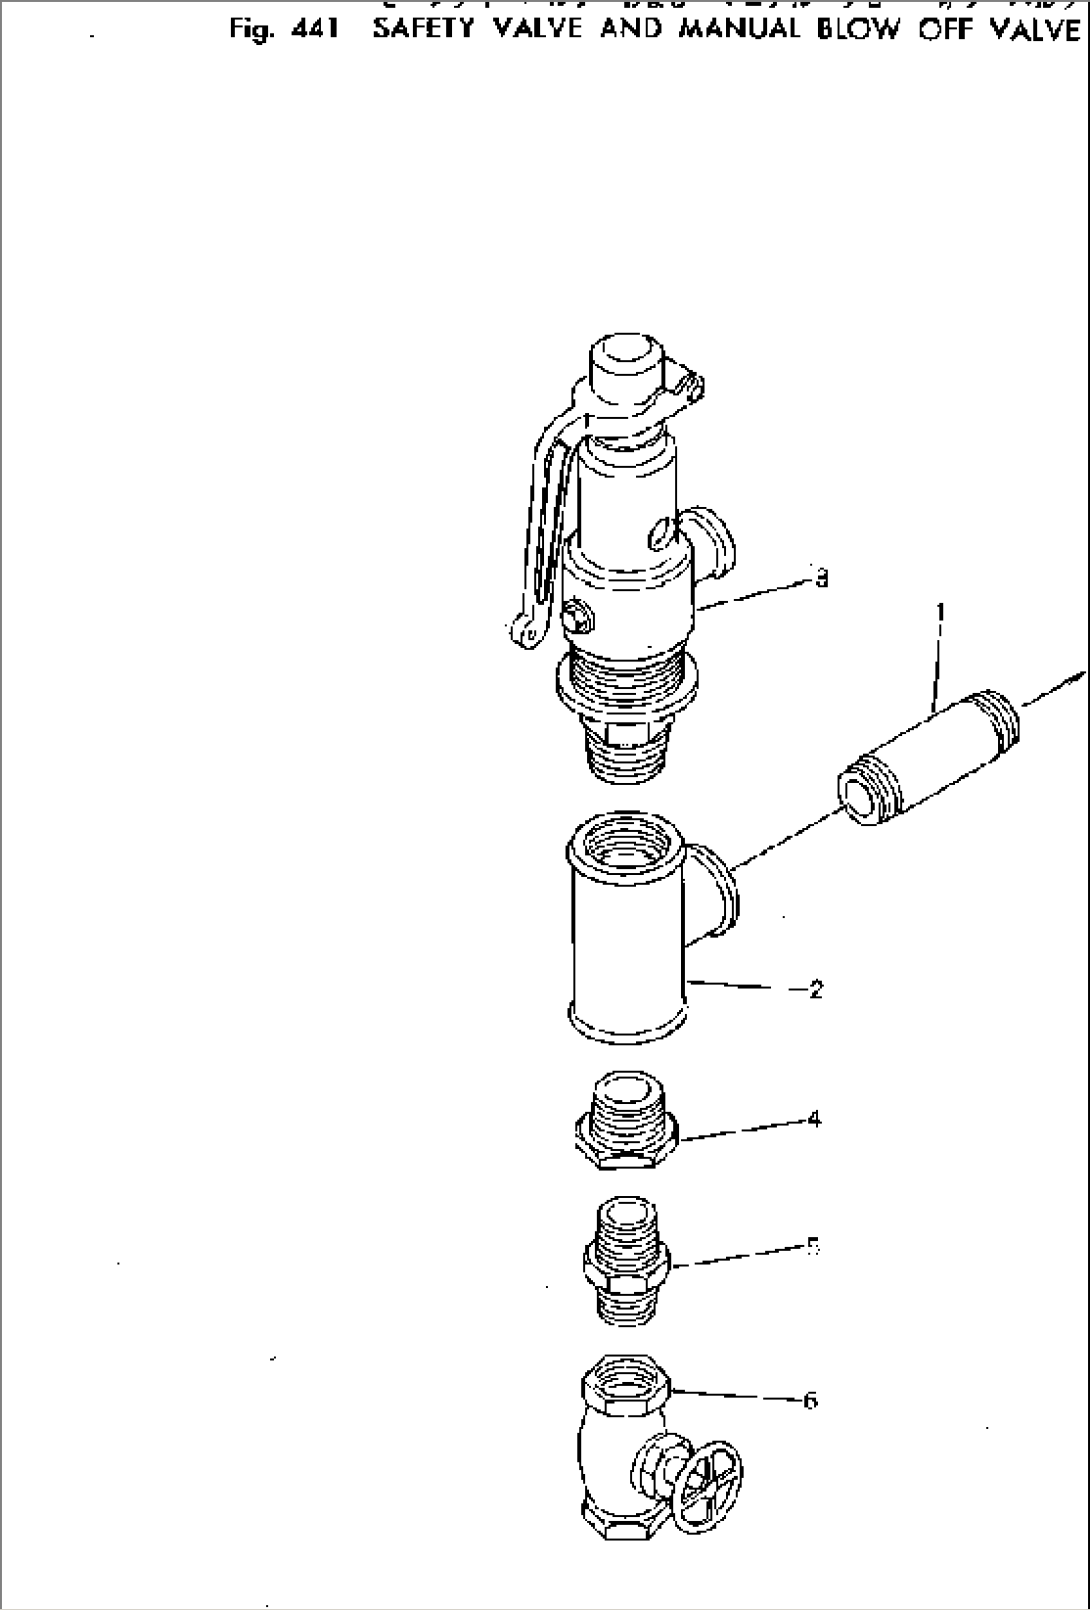 SAFETY VALVE AND MANUAL BLOW OFF VALVE